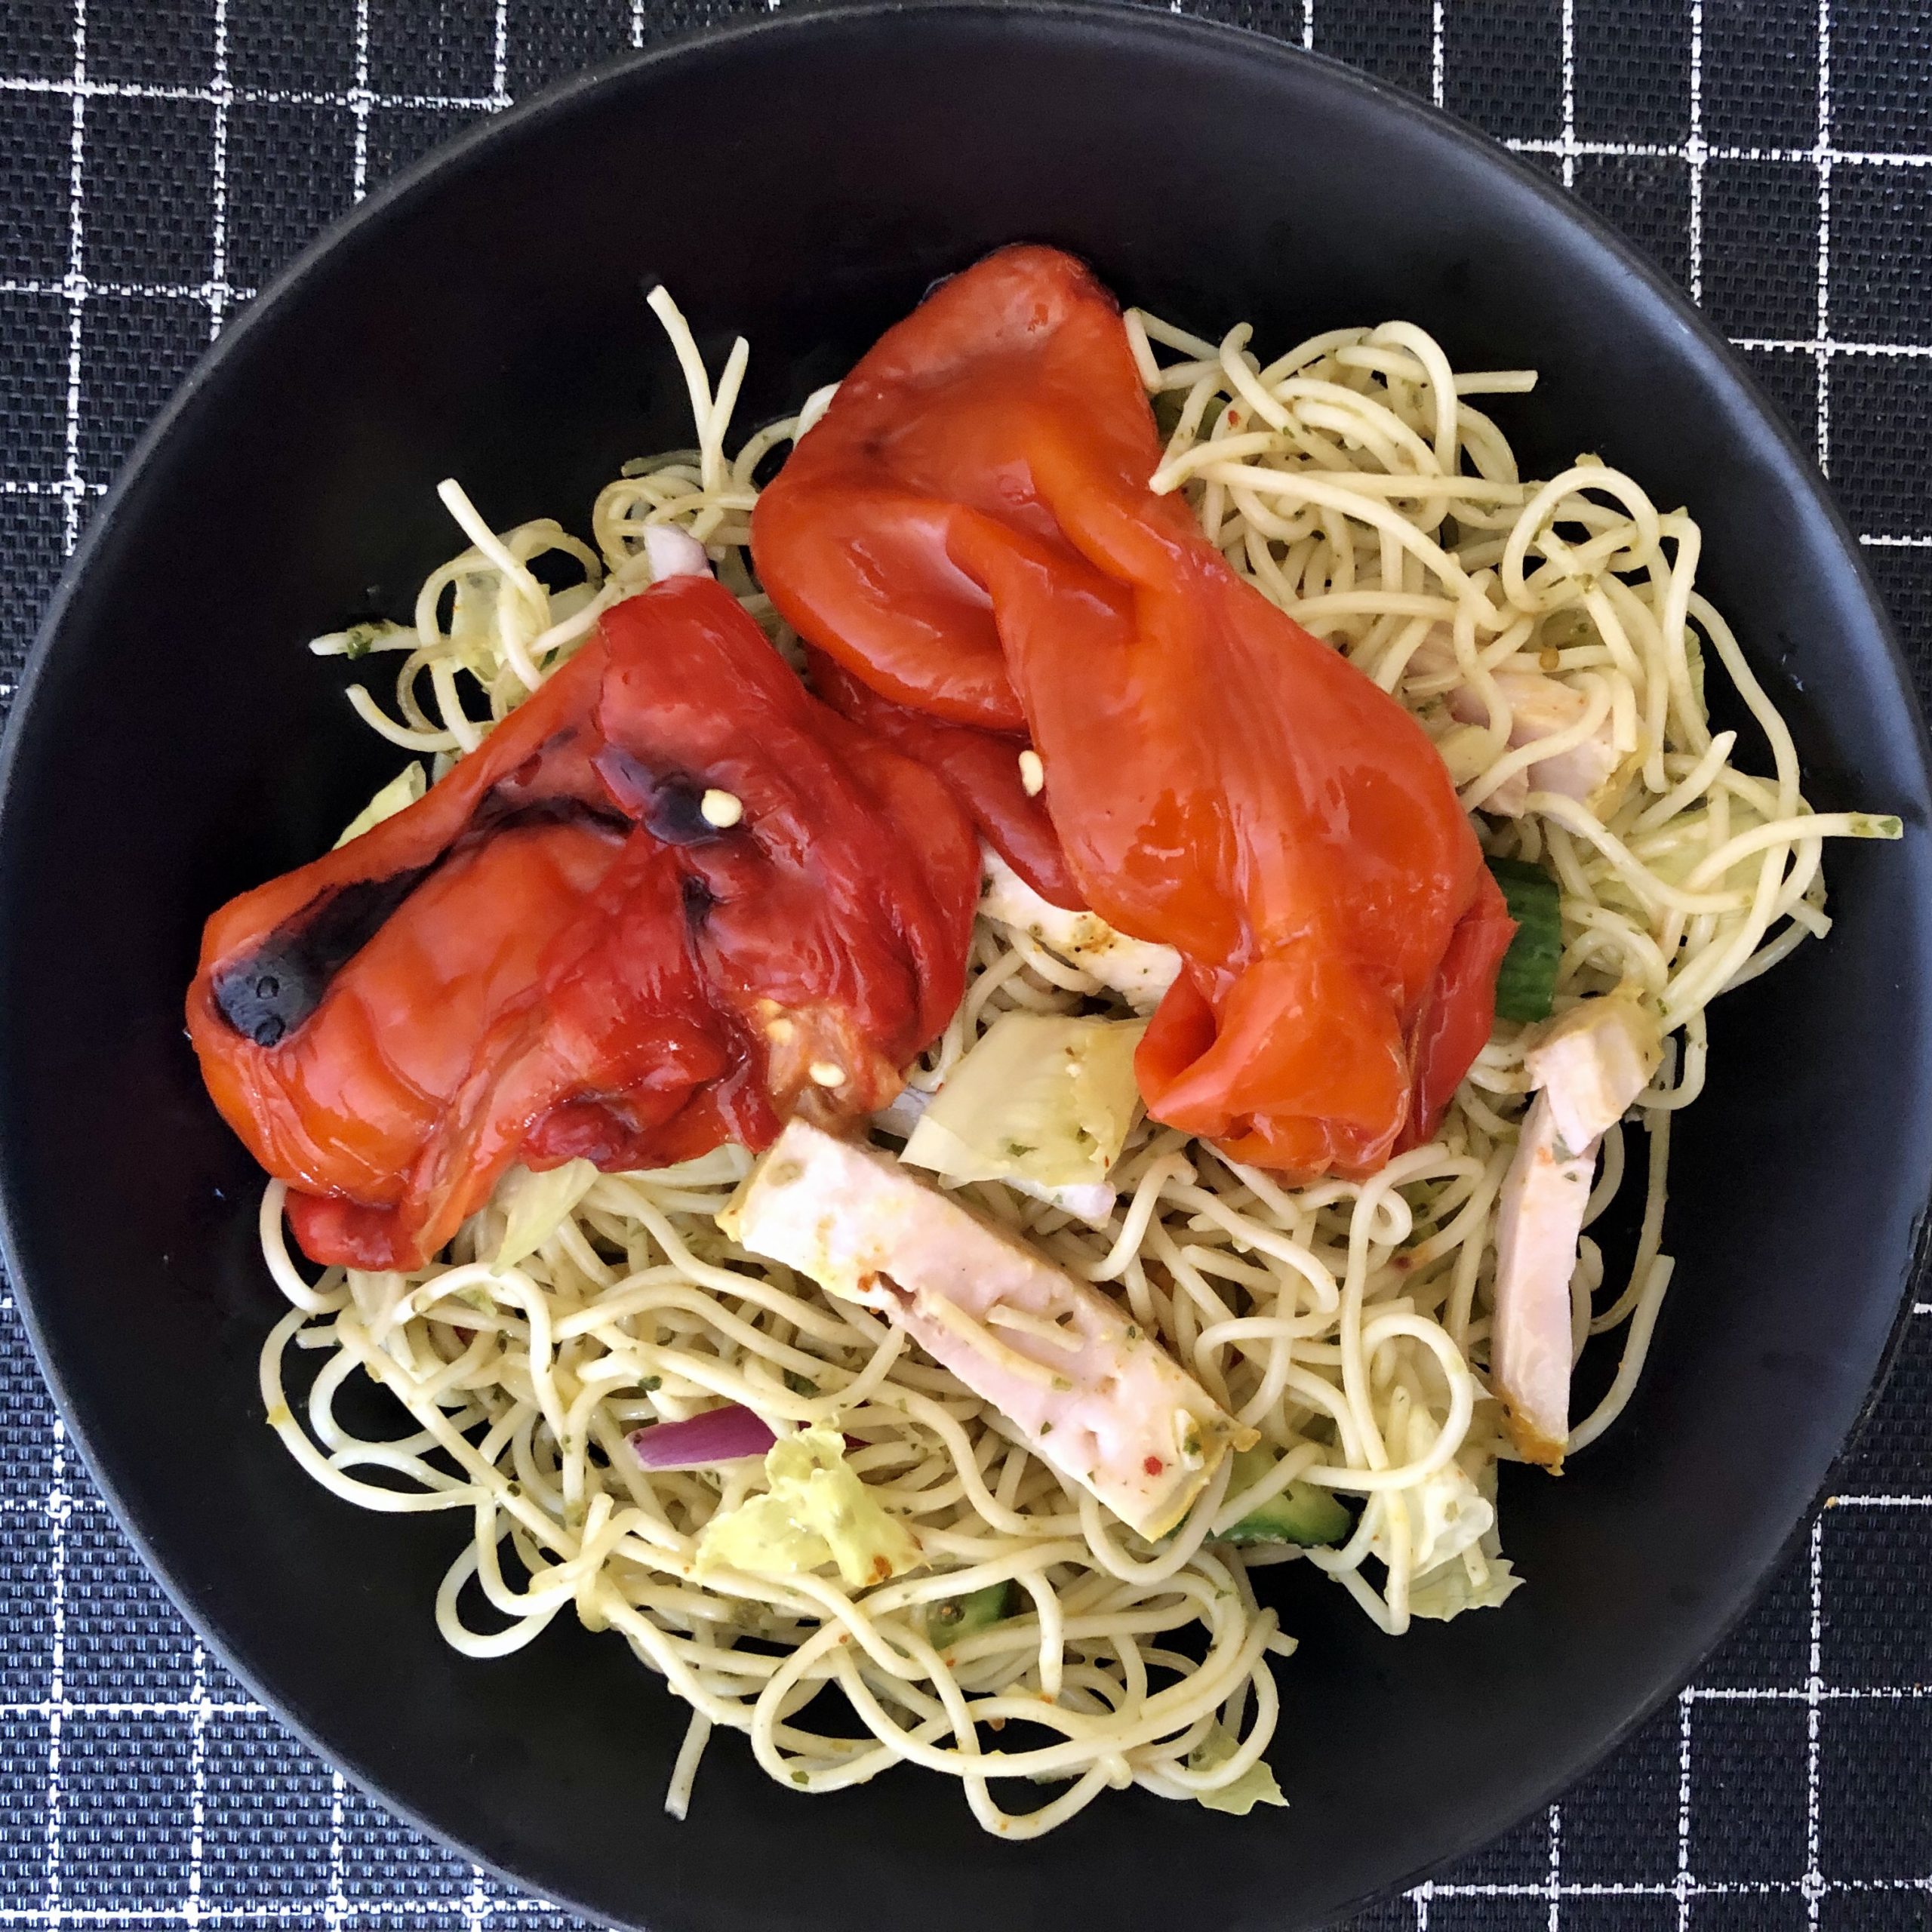 Cold Pasta Salad with Roasted Peppers, Diced Chicken Breast, Cucumbers and Onions